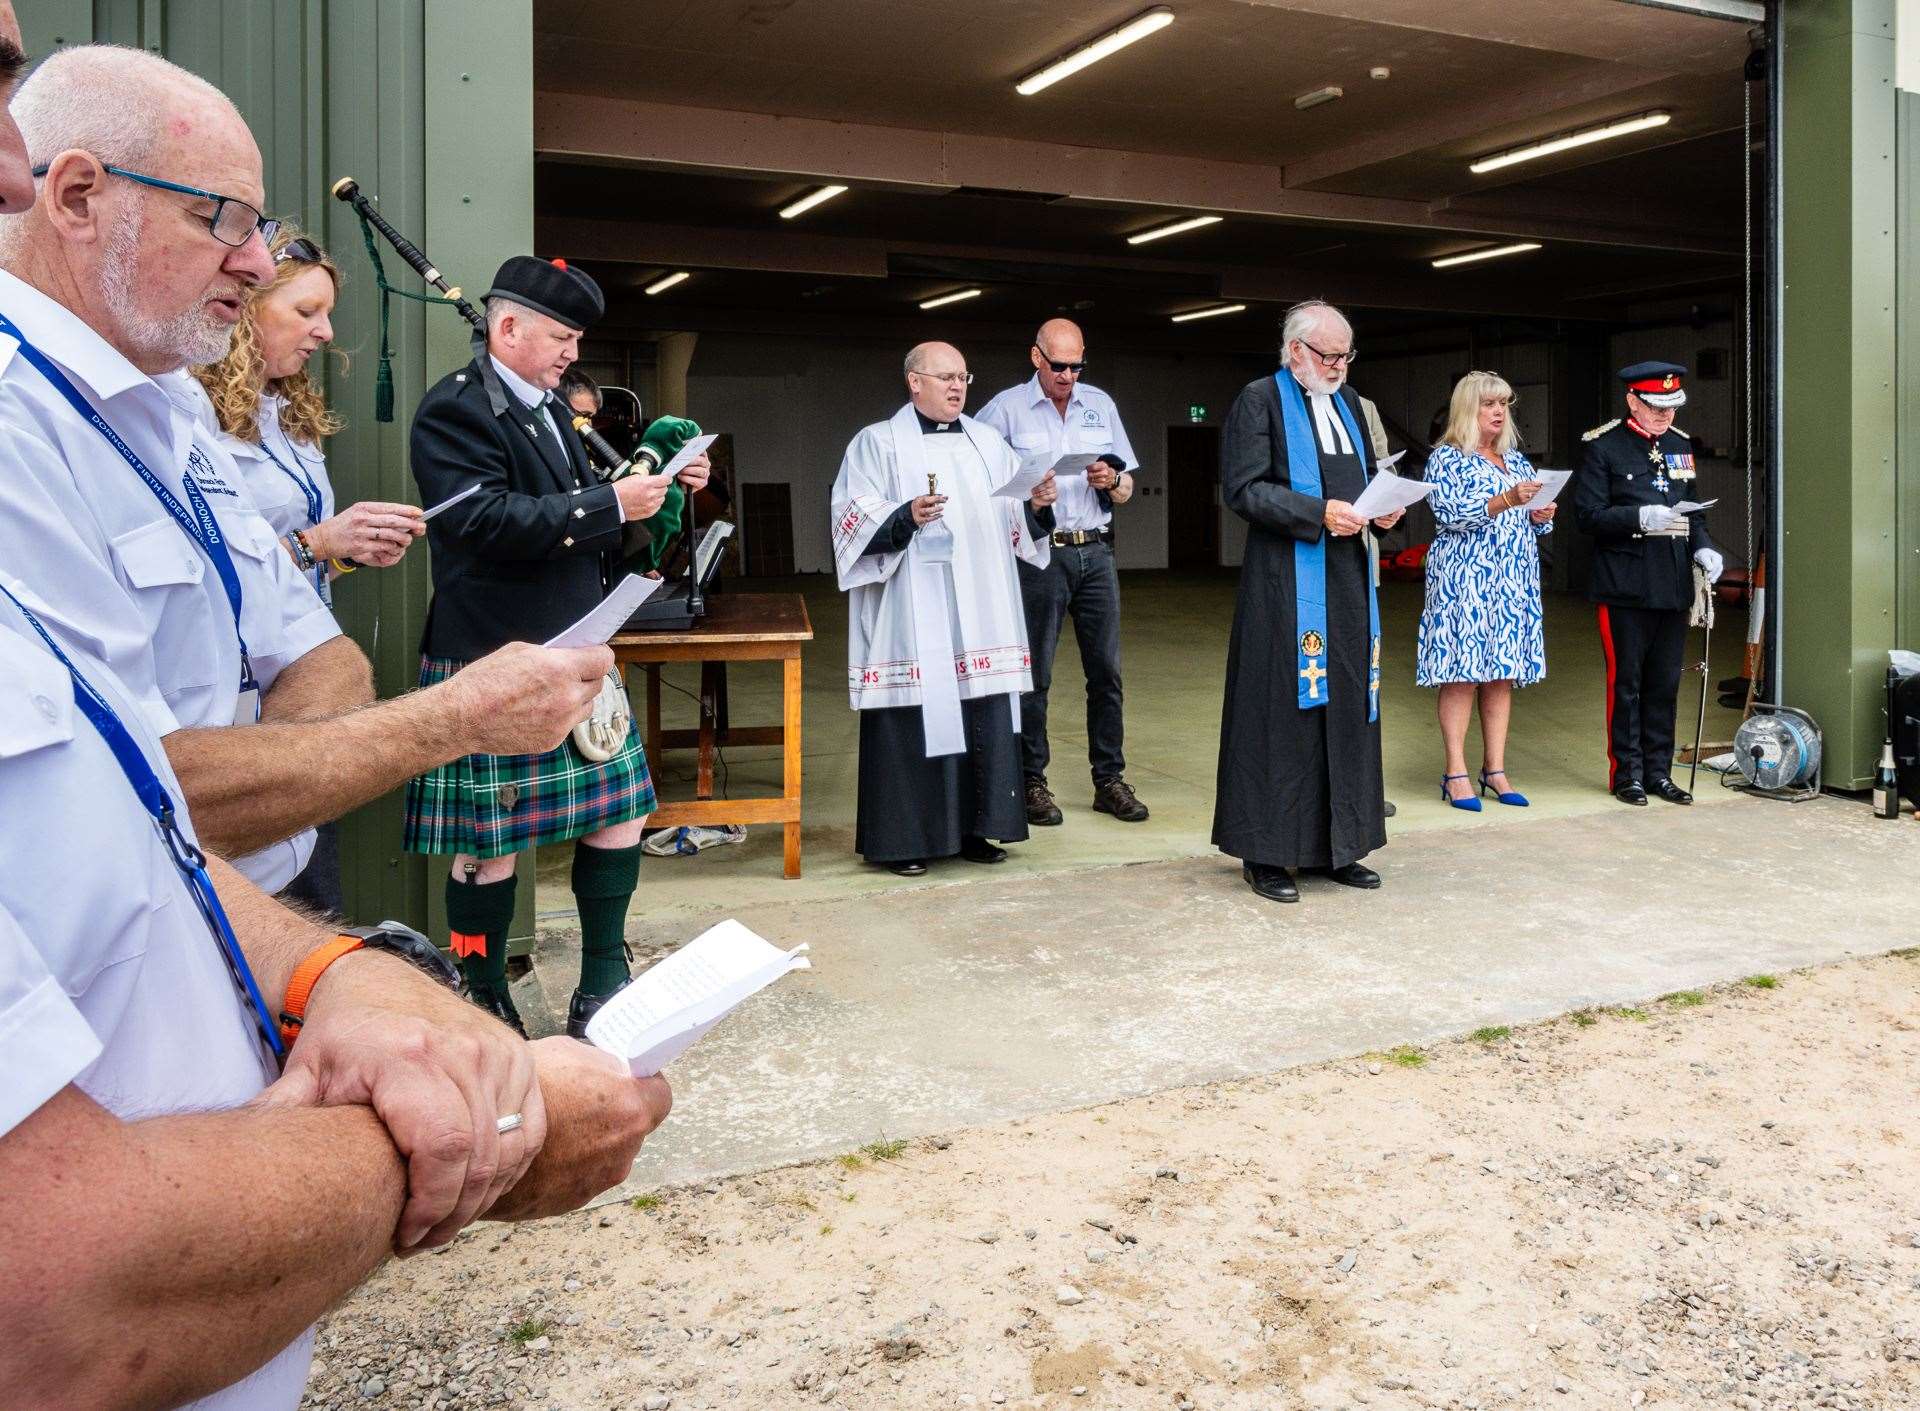 The programme for the ceremony had a religious element with prayers and a hymn as well as a blessing for the boat and crew. Picture: Andy Kirby